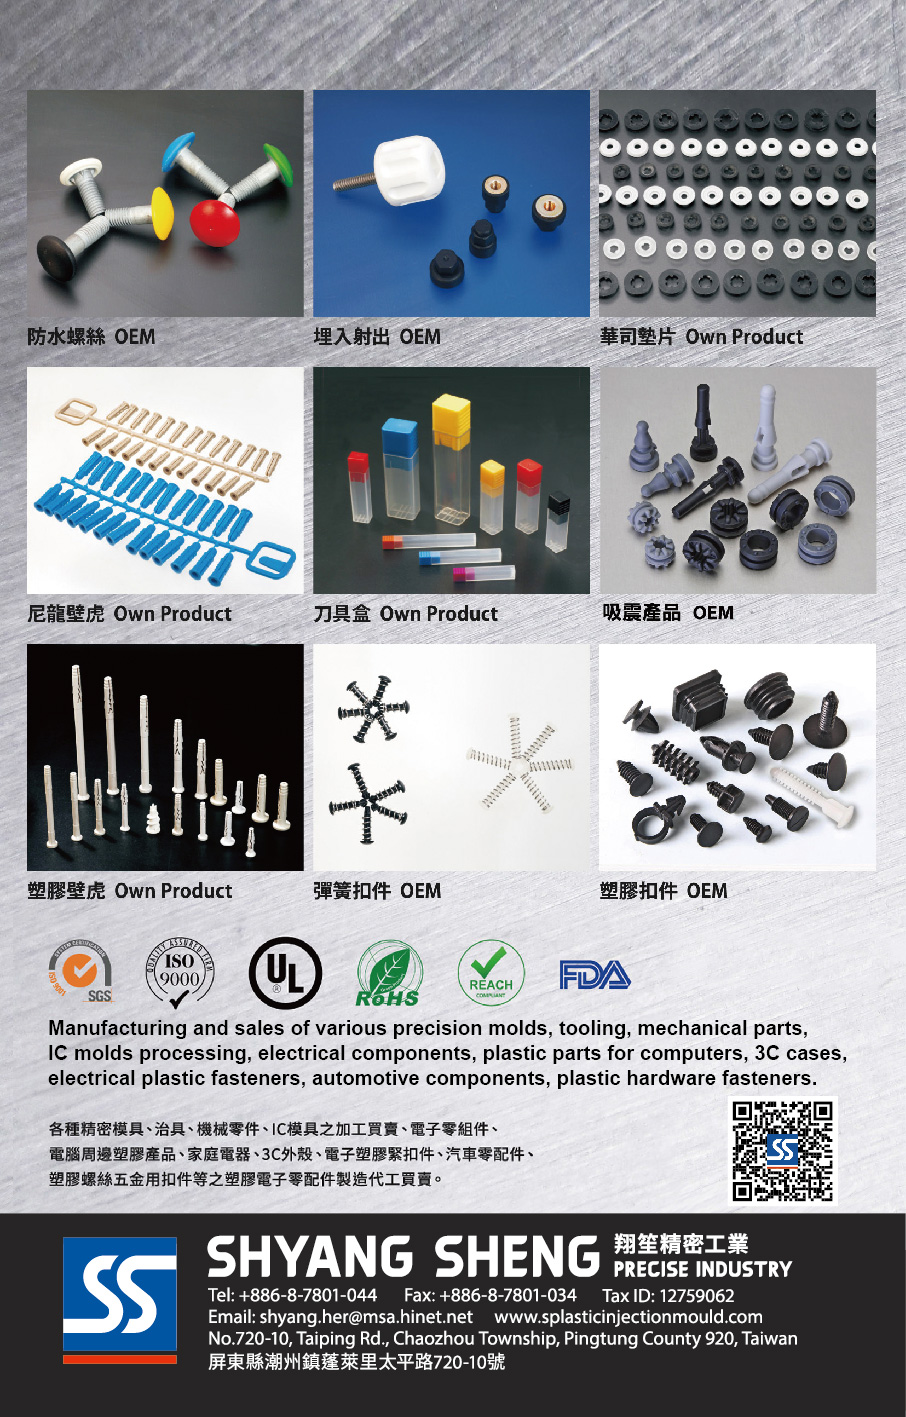 SHYANG SHENG PRECISE INDUSTRY CO., LTD. , OEM, Precision Molds, Tooling, Mechanical Parts, IC molds Processing, Electrical Components, Plastic Parts for Computer, 3C cases, Electrical Plastic Fasteners, Automotive Components, Plastic Hardware Fasteners , Injection Molding Machine Screws